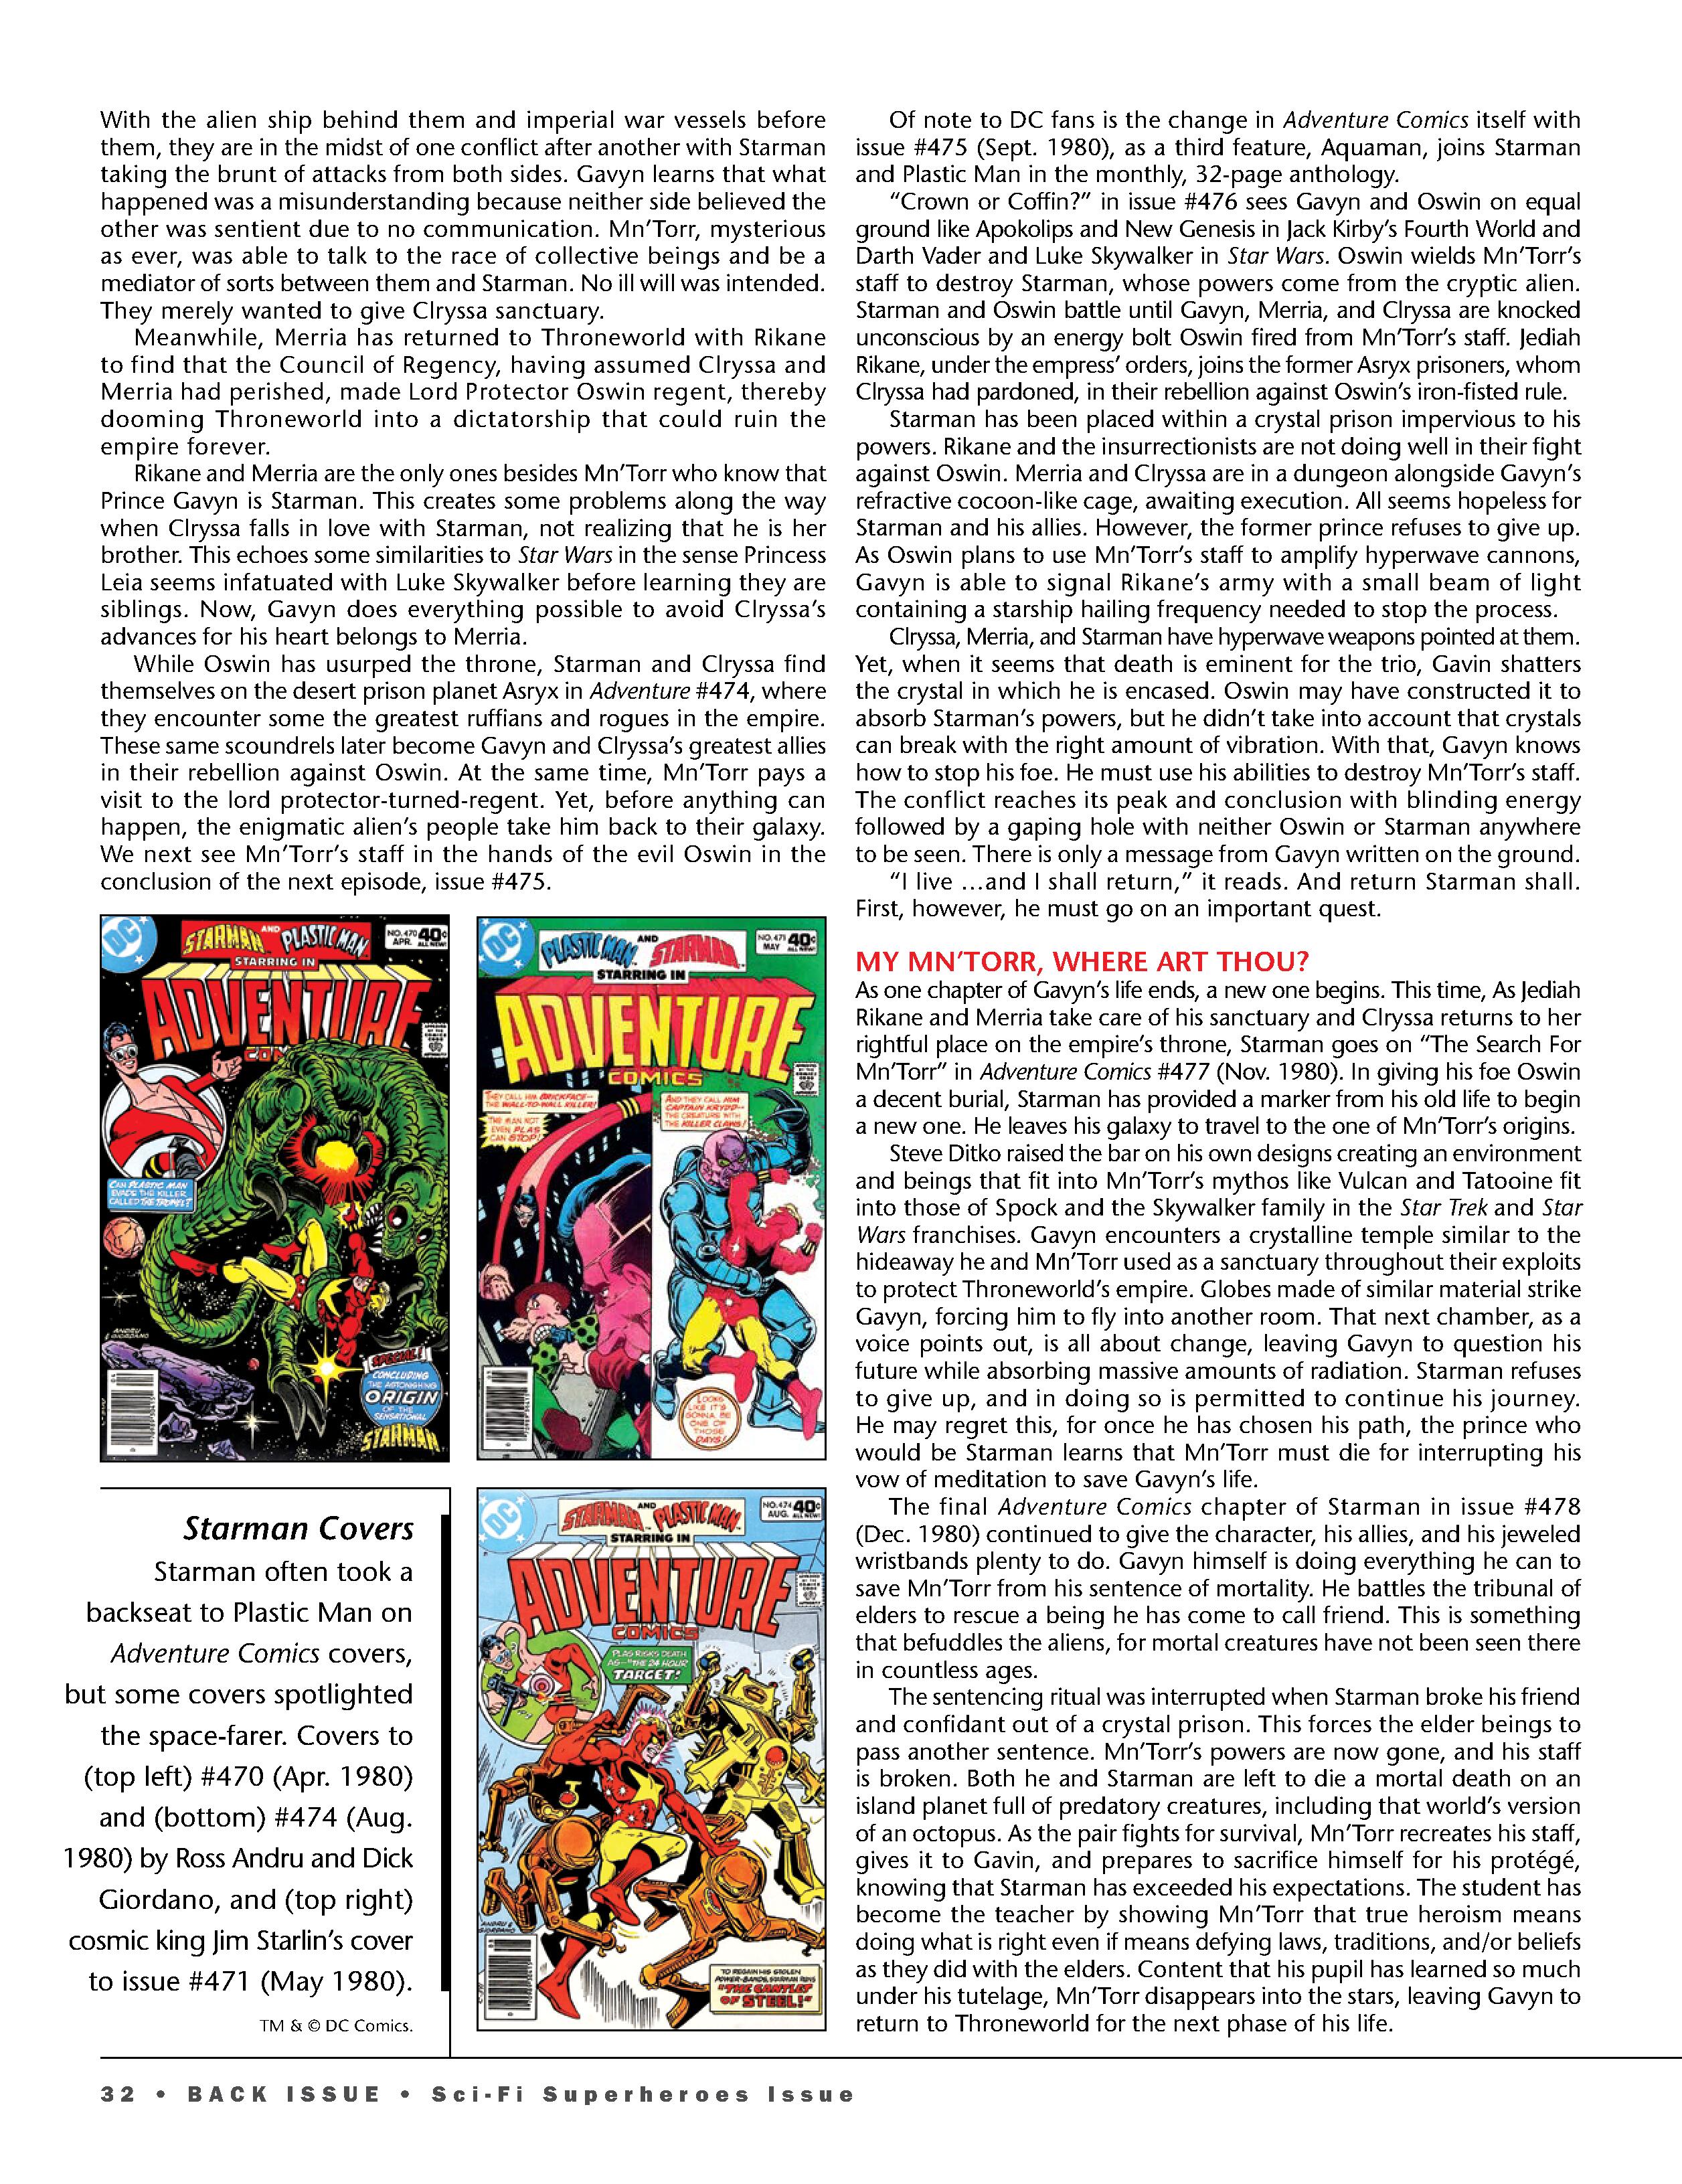 Read online Back Issue comic -  Issue #115 - 34